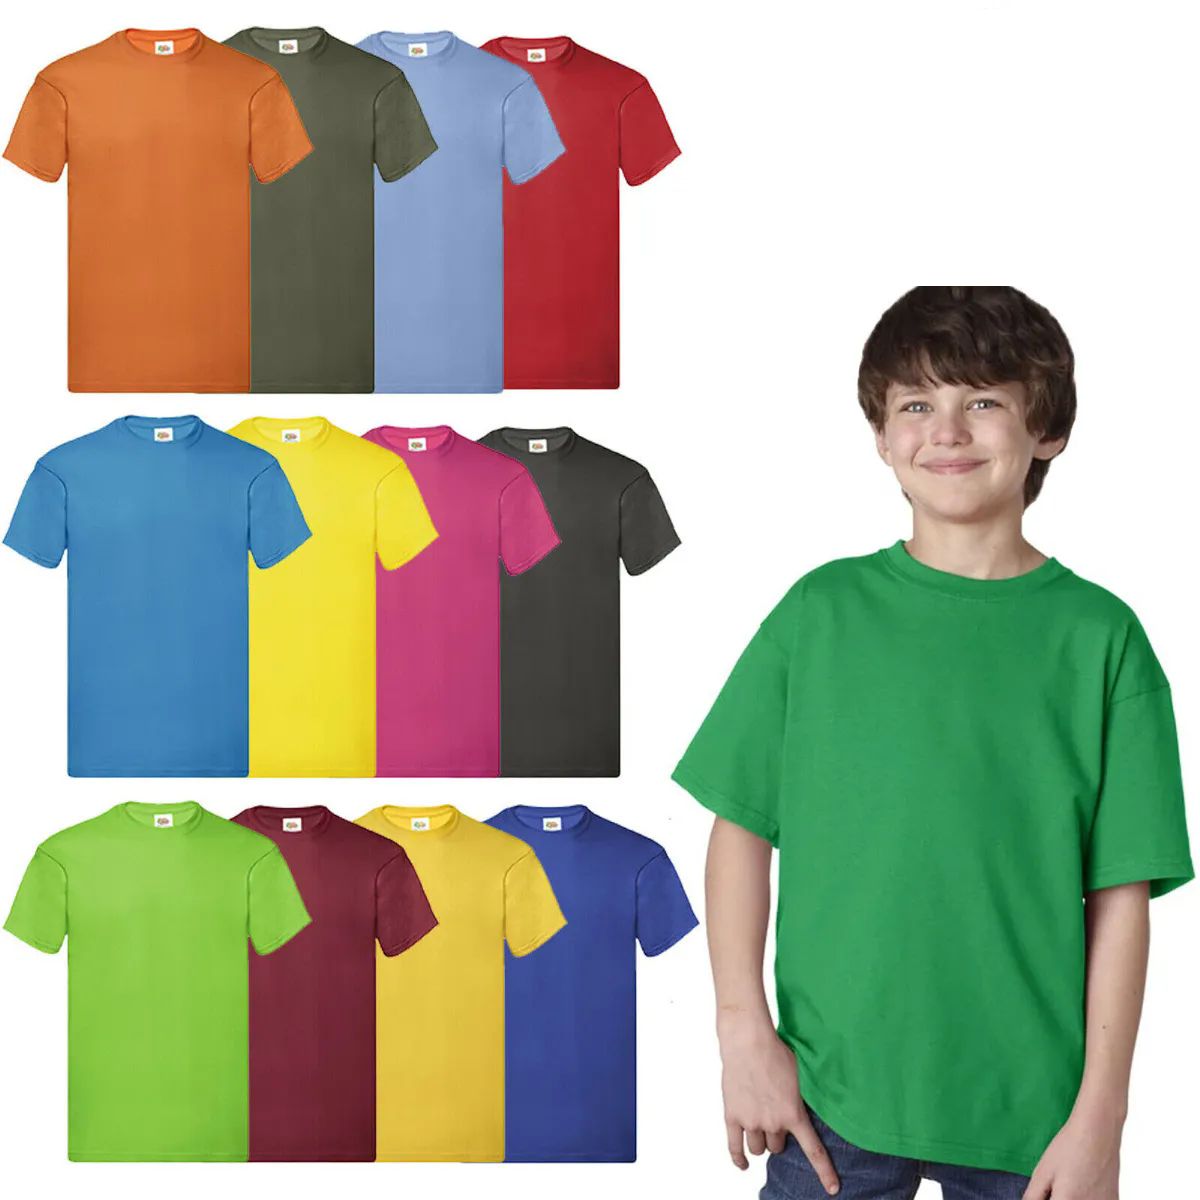 576 Pieces of Billion Hats Kids Youth Cotton Assorted Colors T Shirts Size L